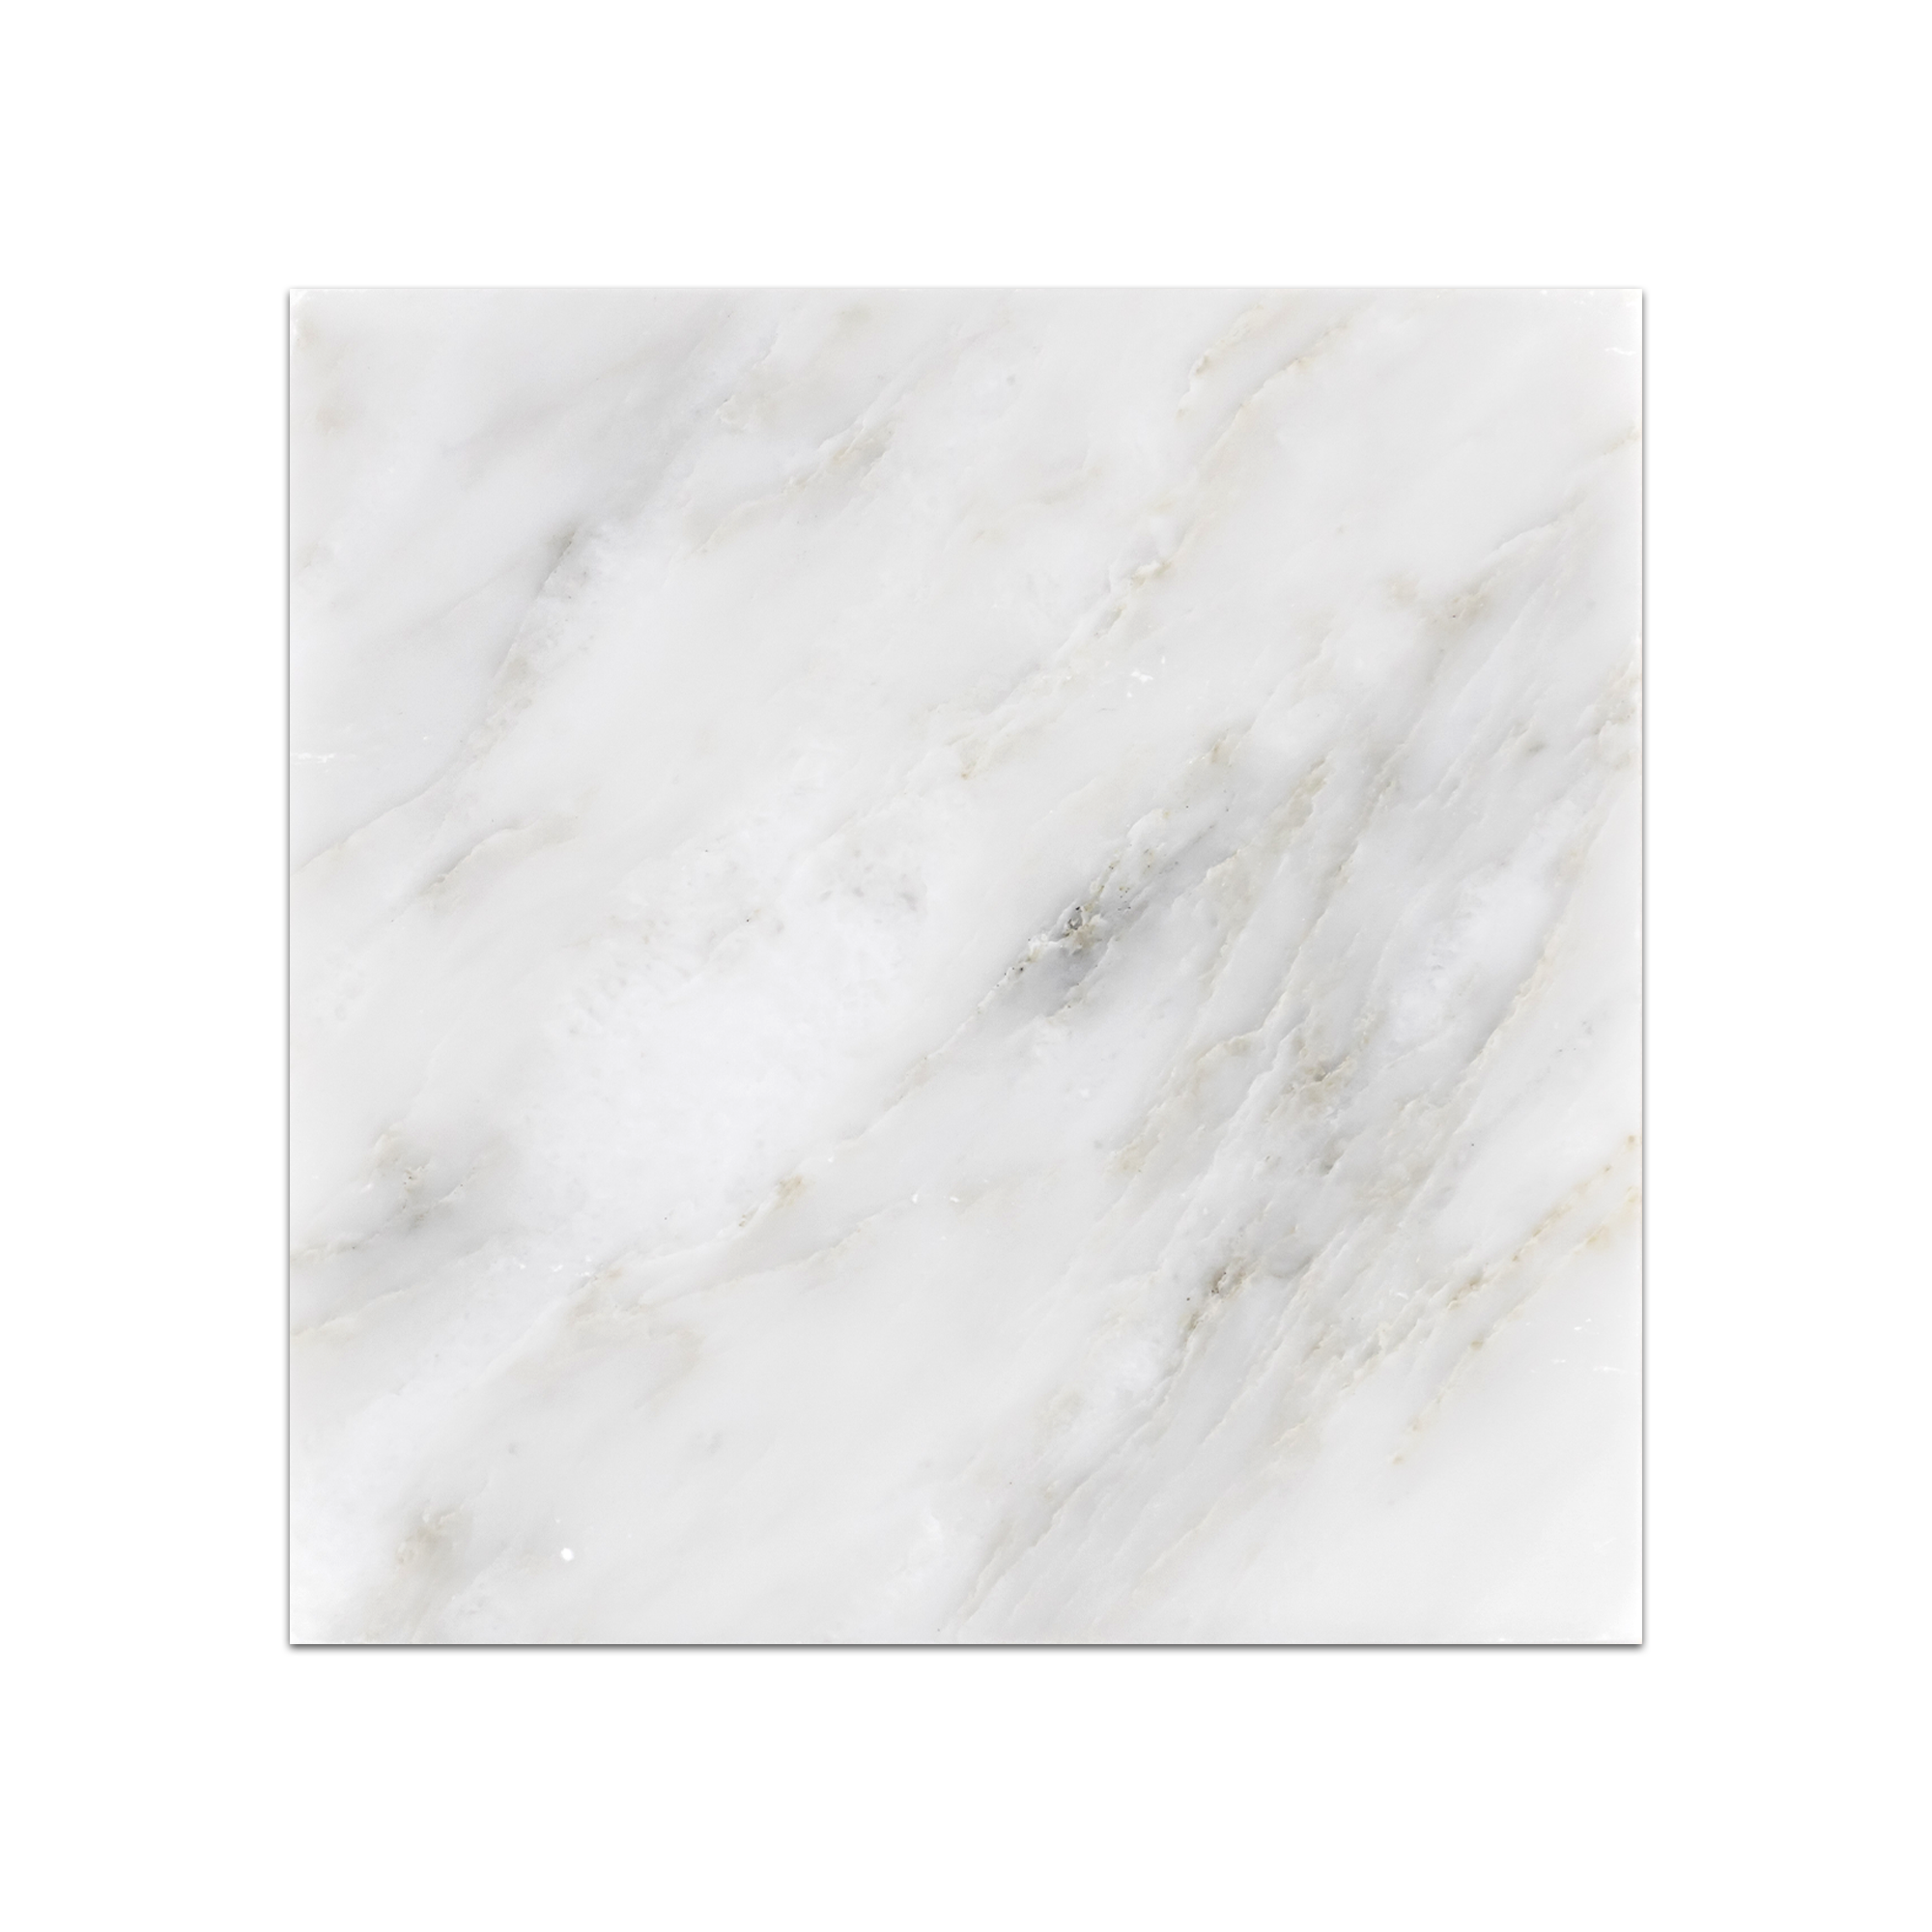 Elon Pearl White Marble Square Field Tile 6x6x0.375 Honed AM8603H Surface Group International Product